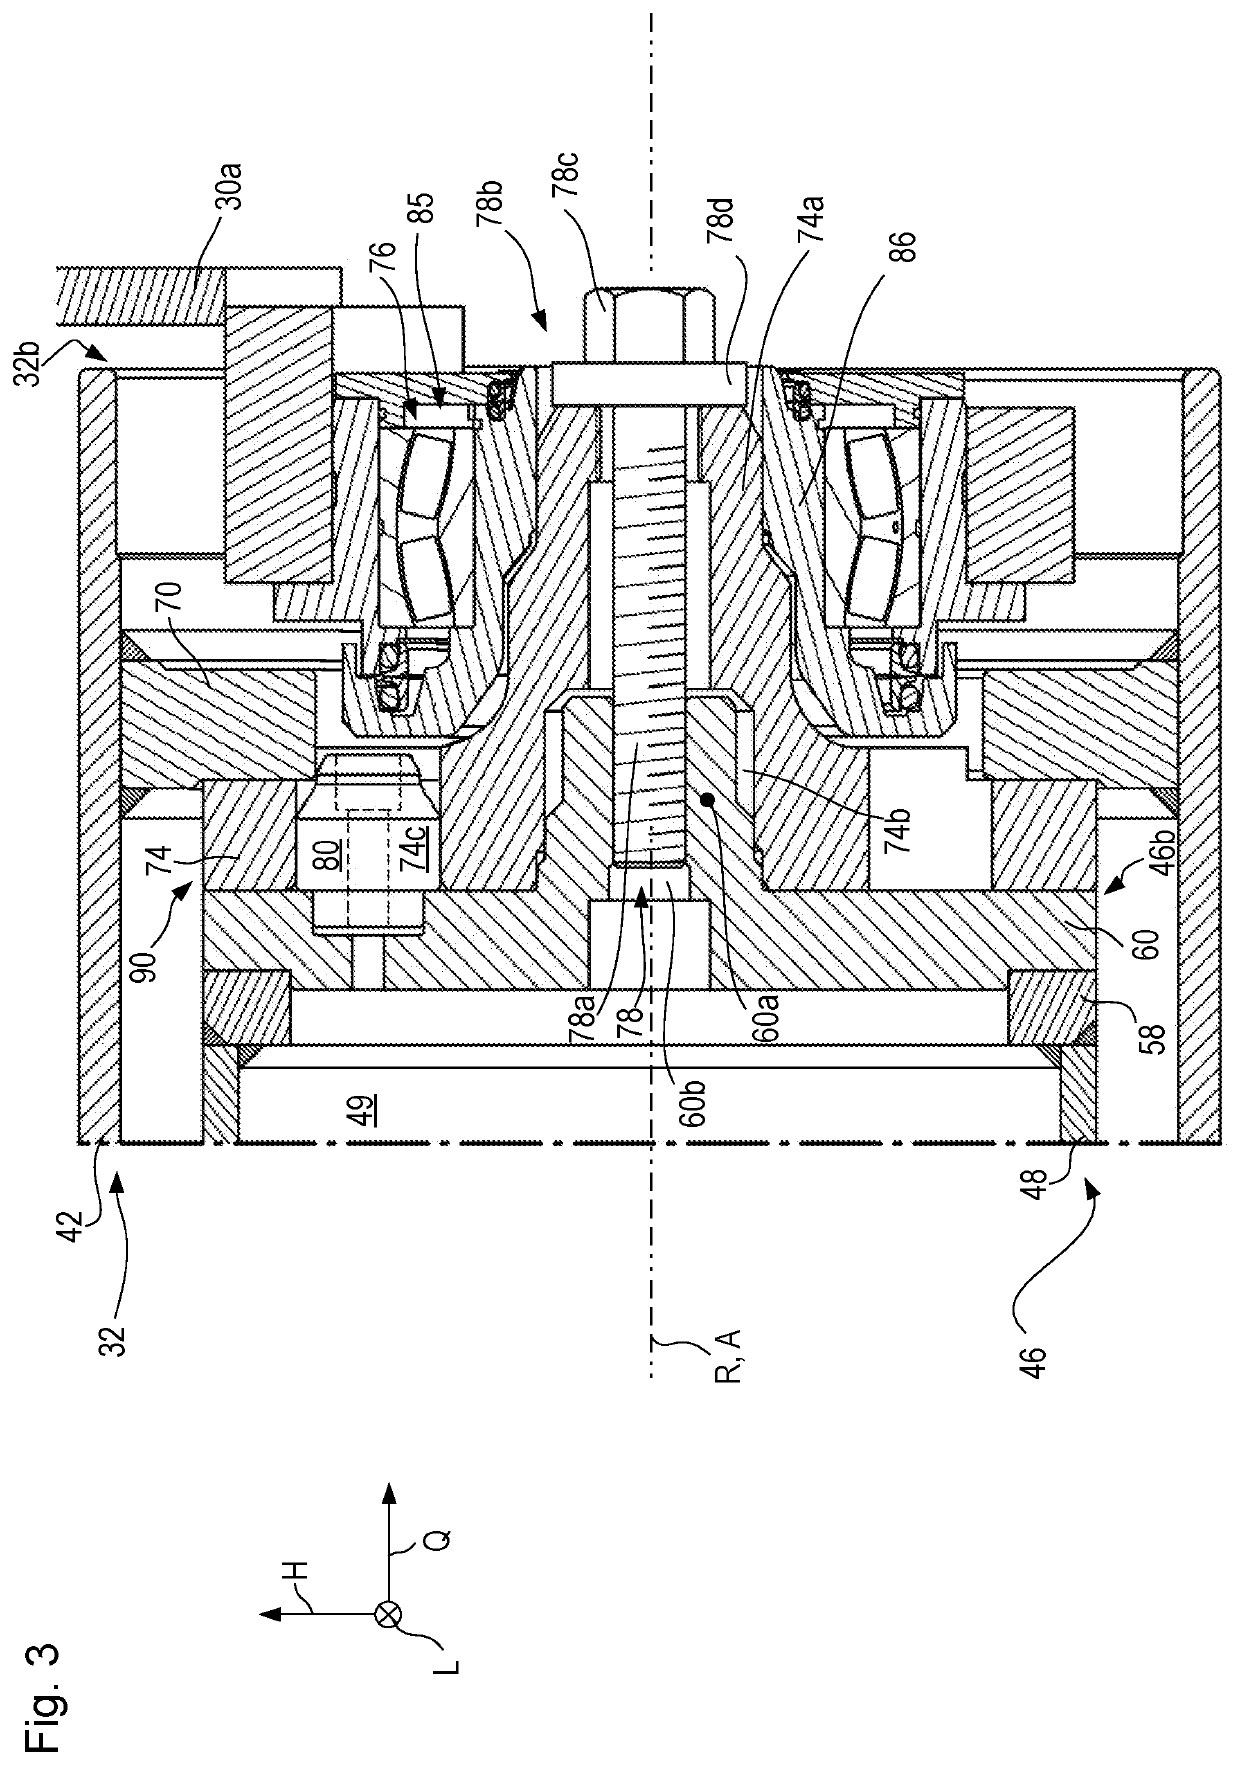 Earth working machine having a rotatable working apparatus axially positionally retainable with high tightening torque by means of a central bolt arrangement, and method for establishing and releasing such retention